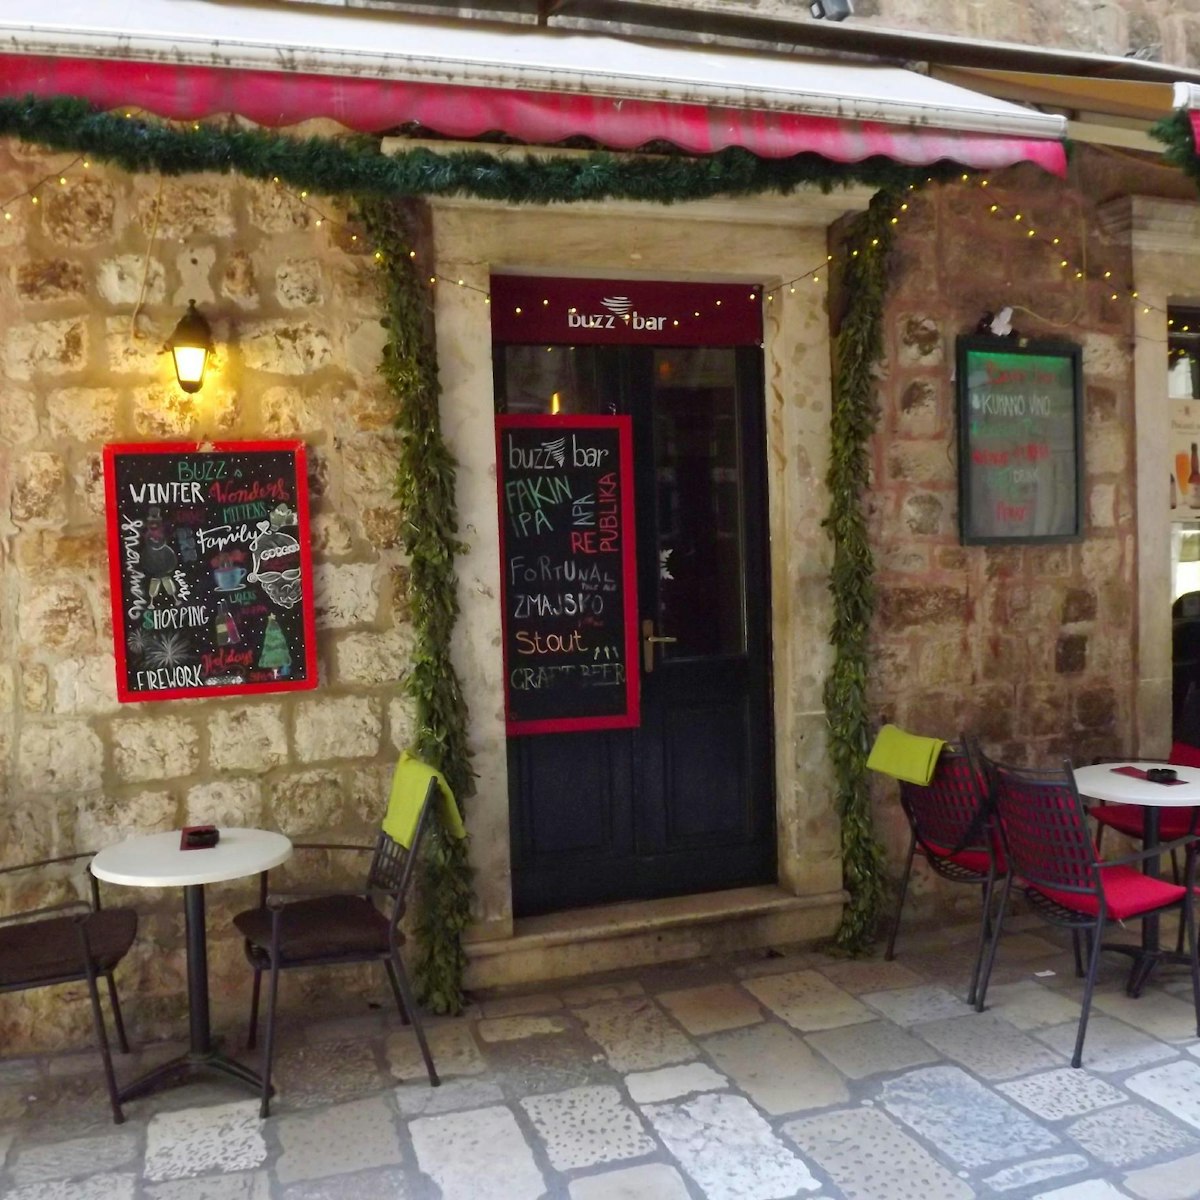 The front of Buzz Bar in Dubrovnik